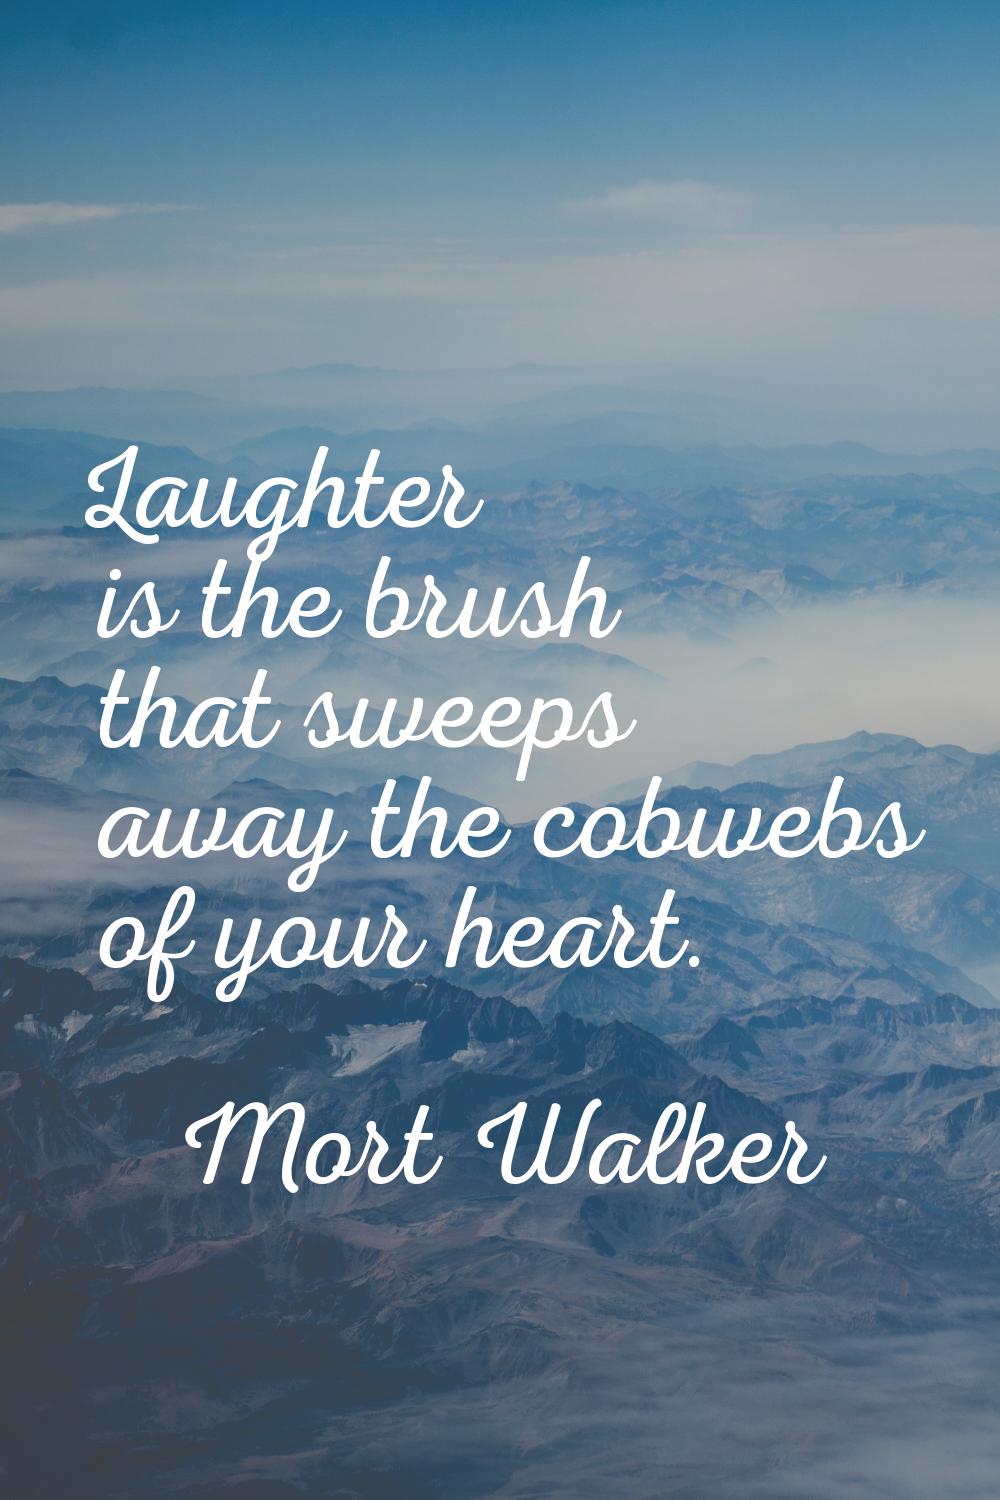 Laughter is the brush that sweeps away the cobwebs of your heart.